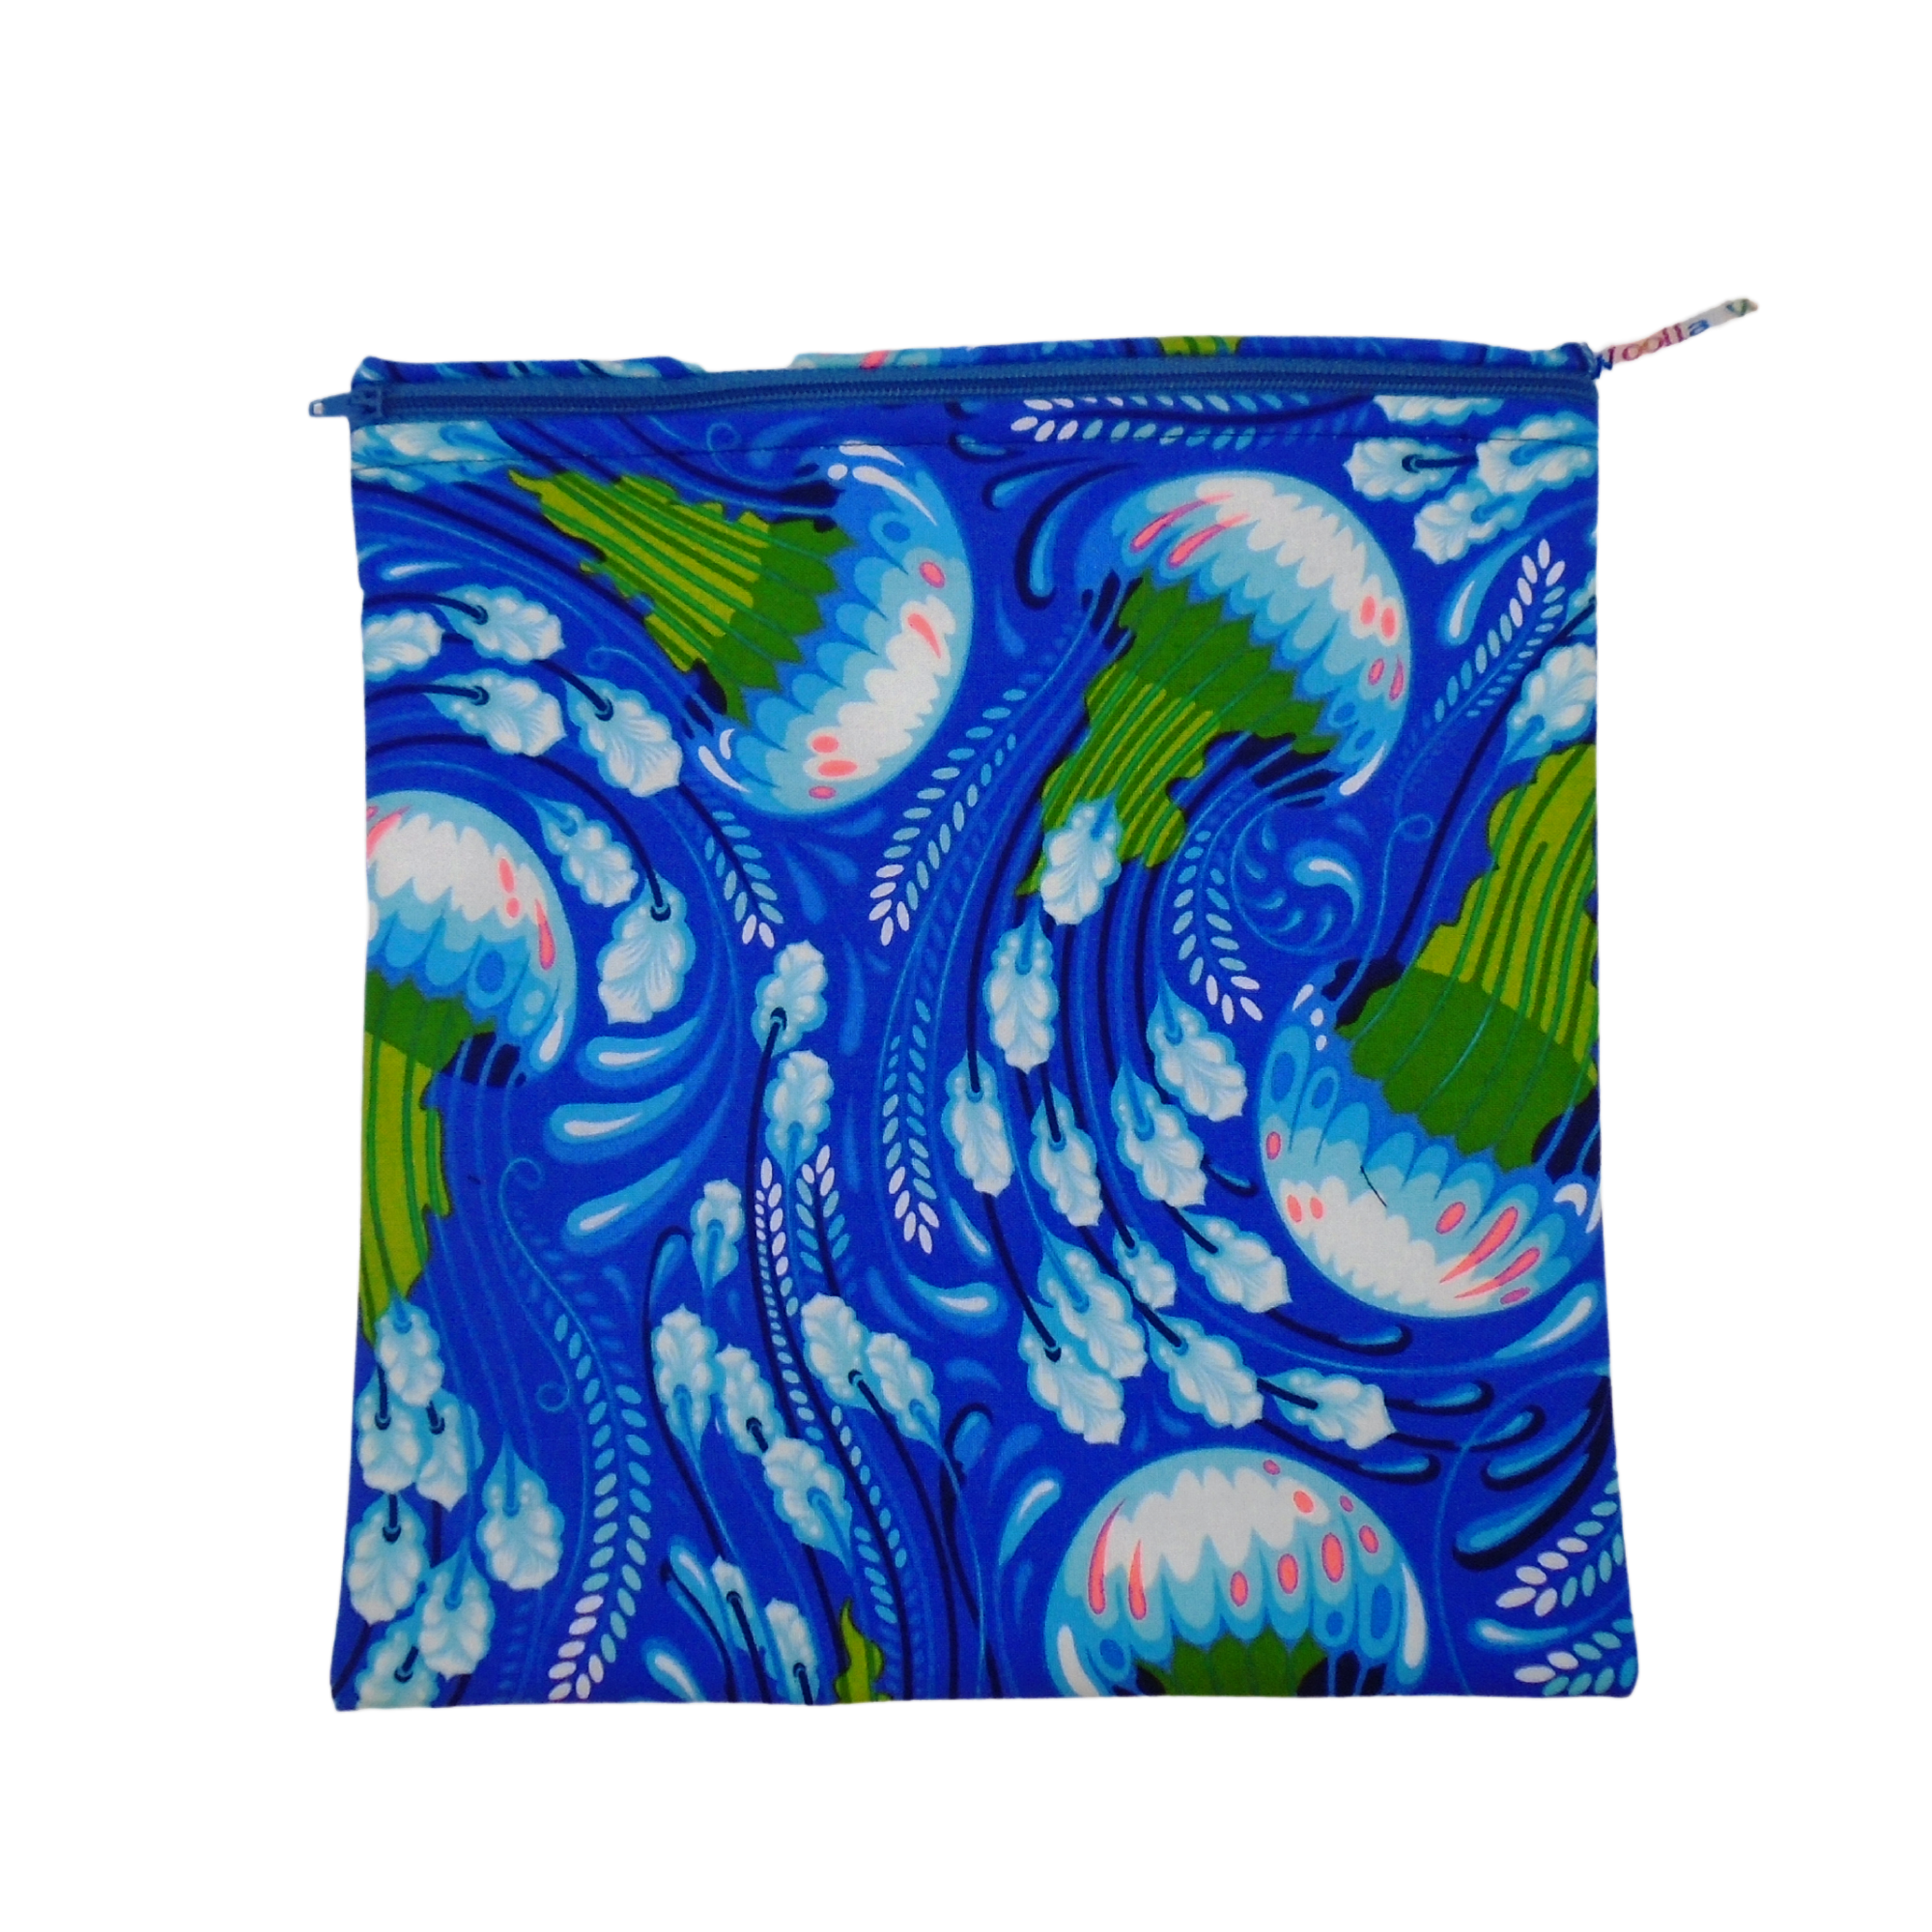 Jellyfish Swirl - Large Poppins Pouch - Waterproof, Washable, Food Safe, Vegan, Lined Zip Bag